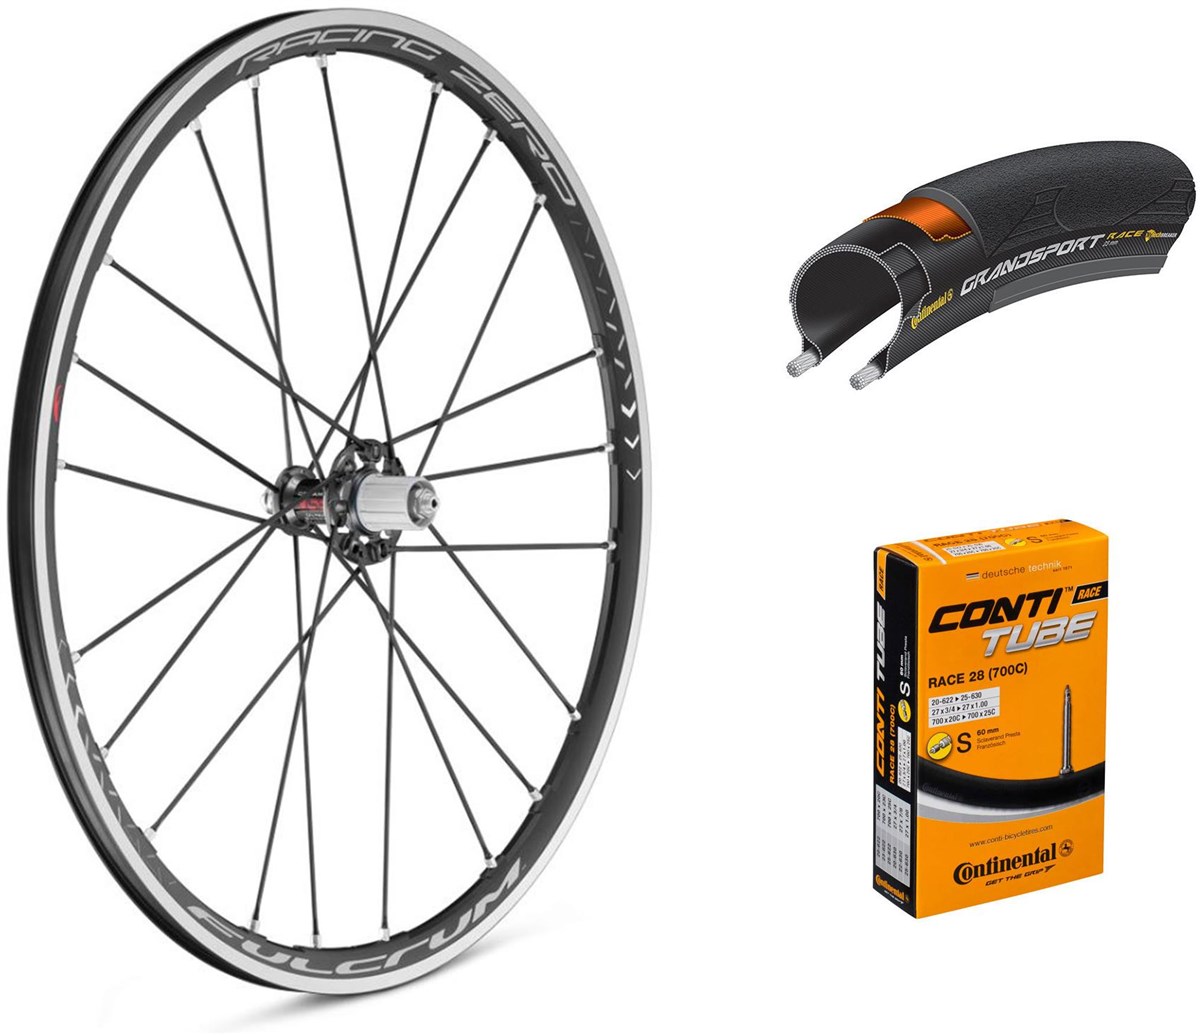 Fulcrum Racing Zero C17 700c Wheelset with Tyres and Tubes product image